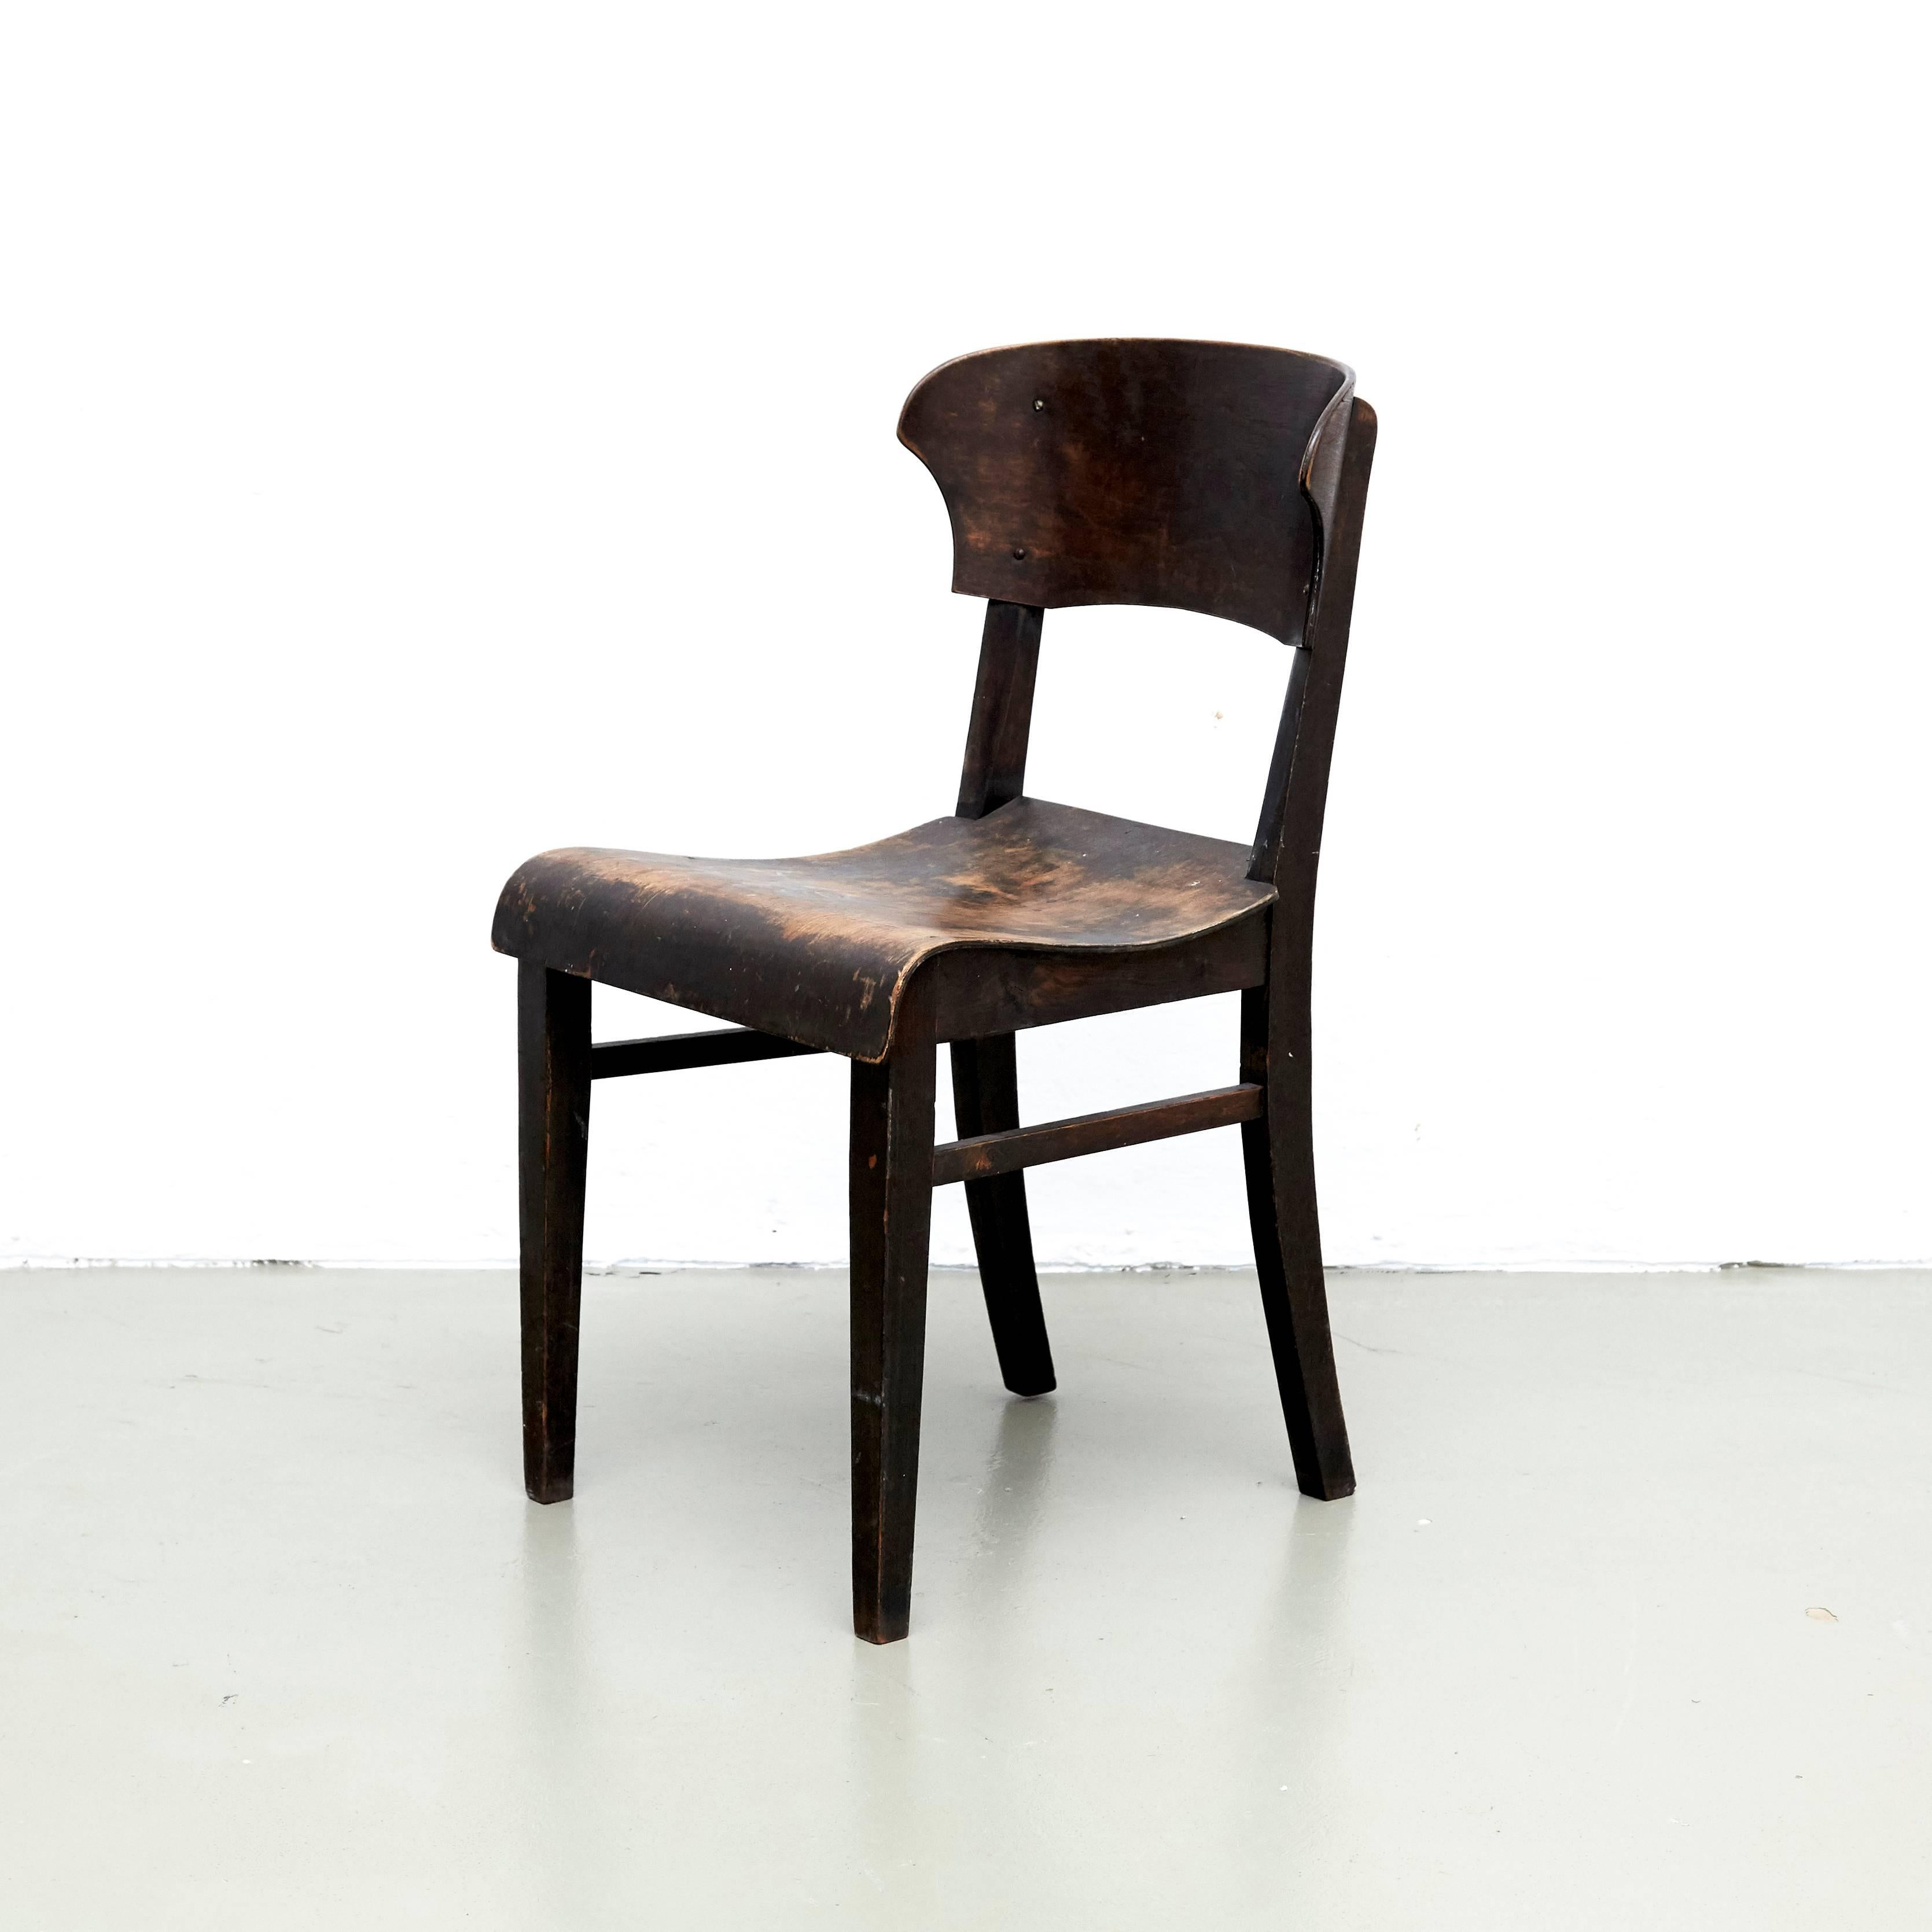 Pair of chairs designed by unknown designer, circa 1925.

Designed in Bauhaus context. Beech, beech ply and stained dark.

In good original condition, with minor wear consistent with age and use, preserving a beautiful patina.

Quite similar